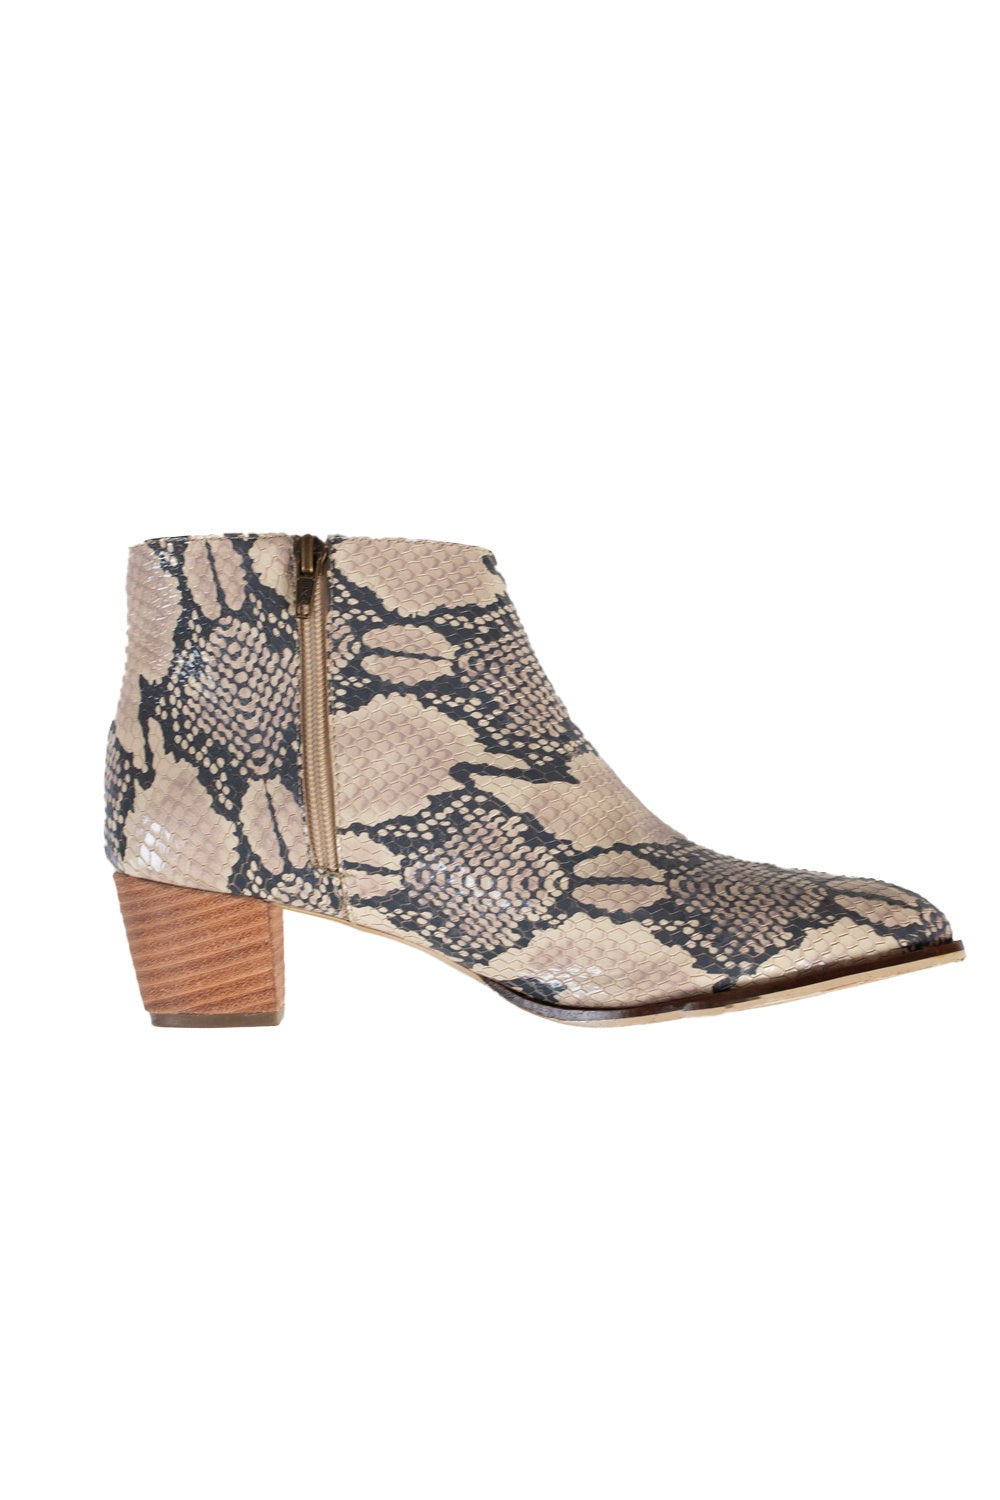 Keira Leather Boots Snakeskin Print Shoes